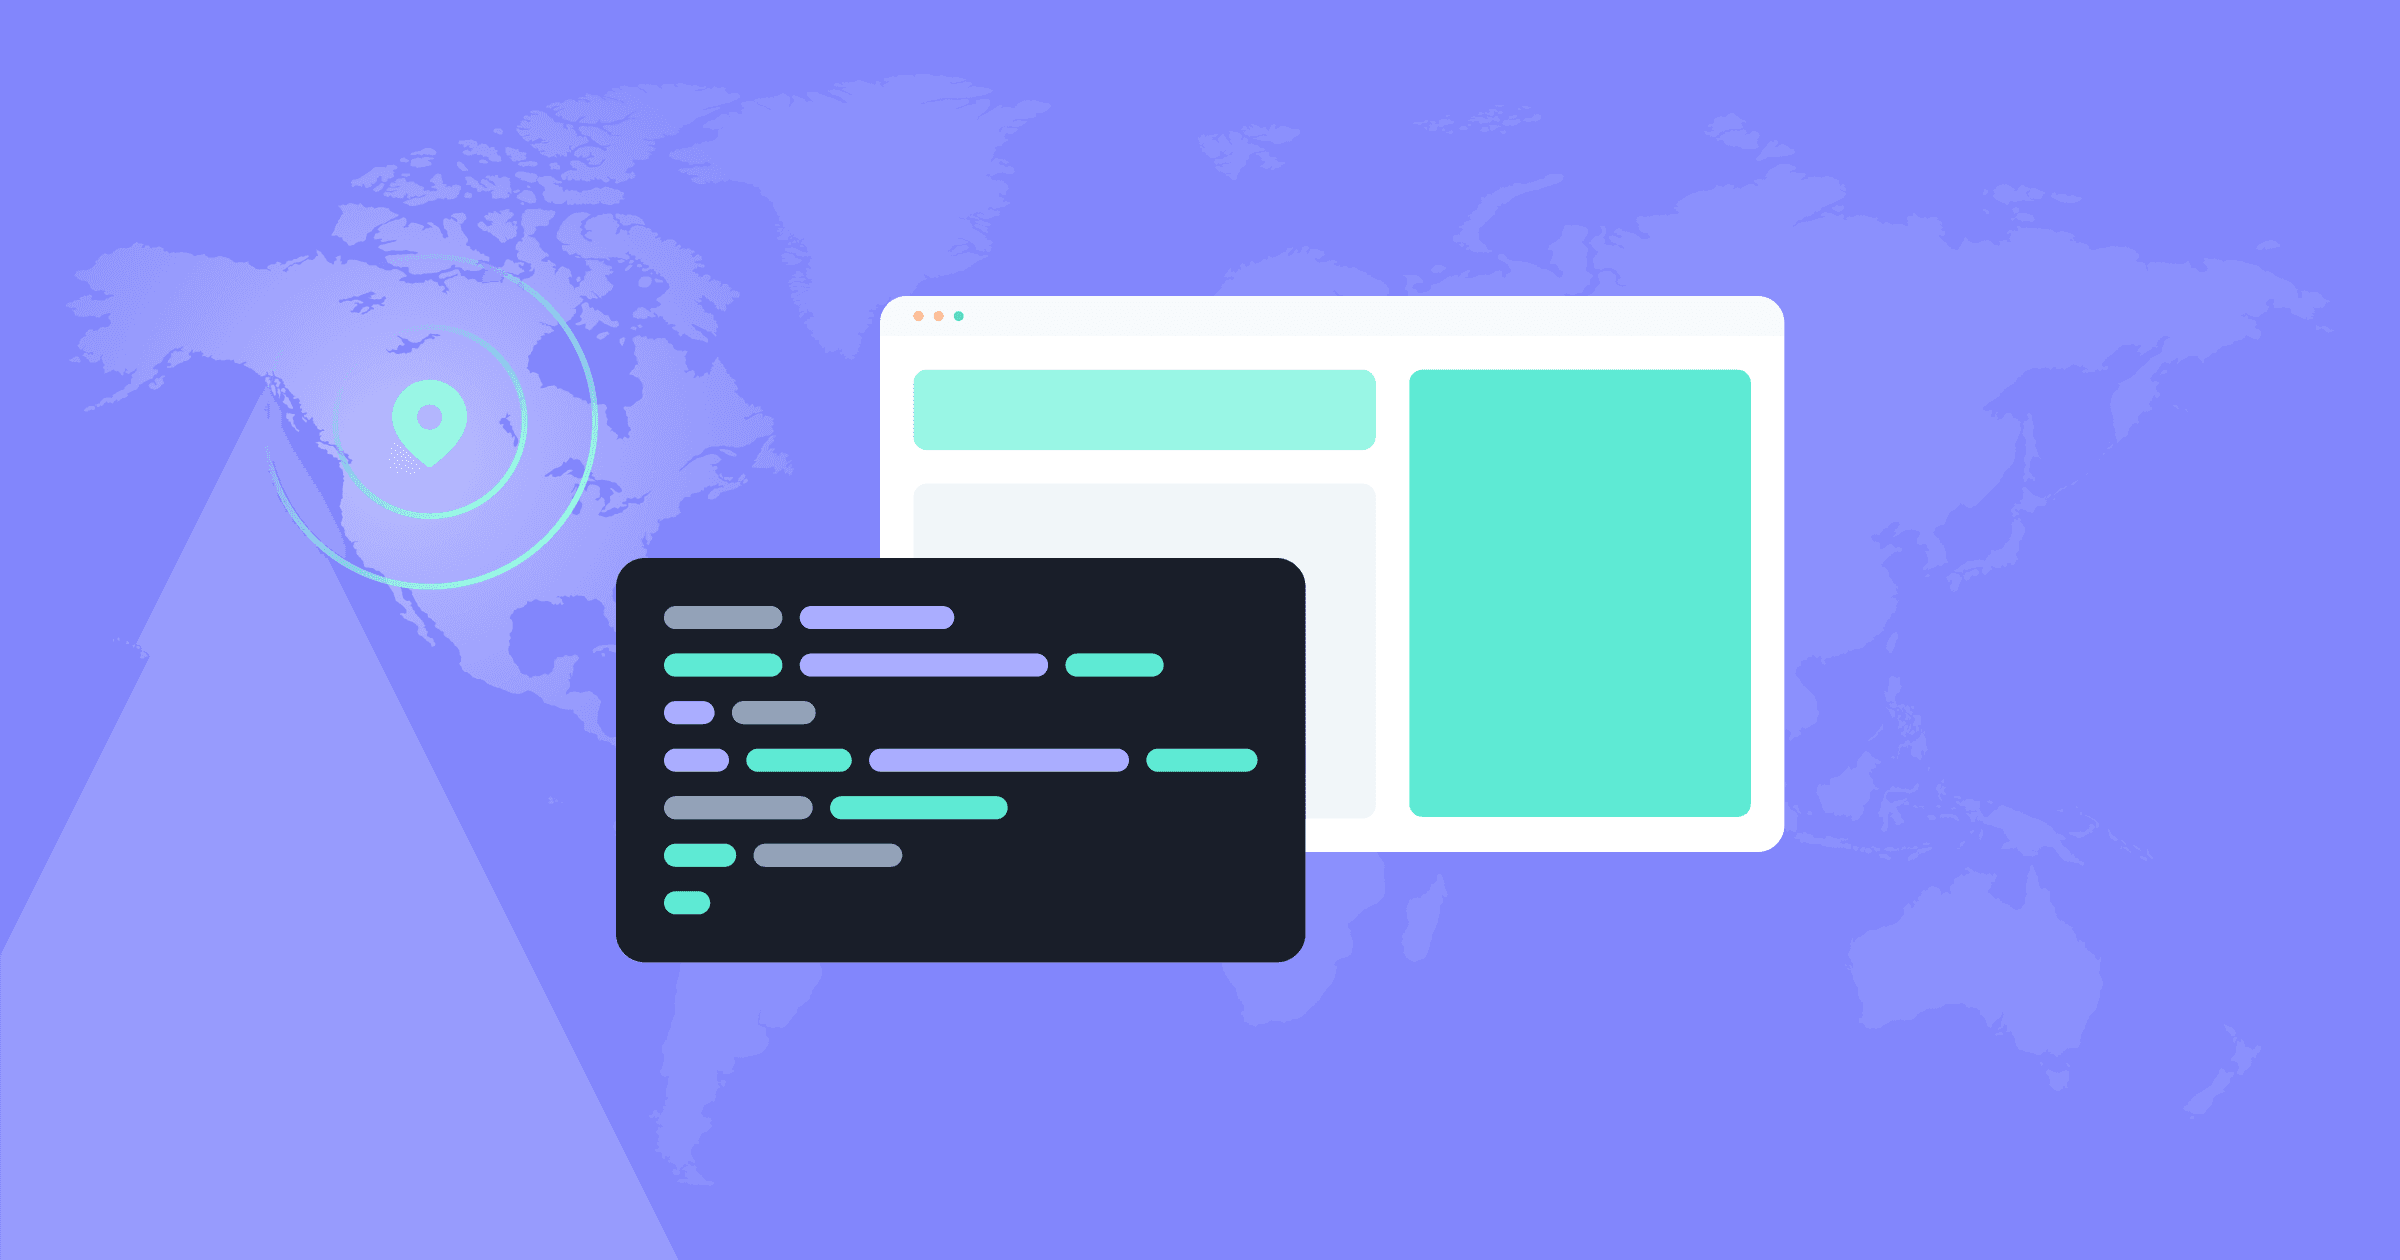 A world map with the user location, a piece of code, and a wireframe of a webpage